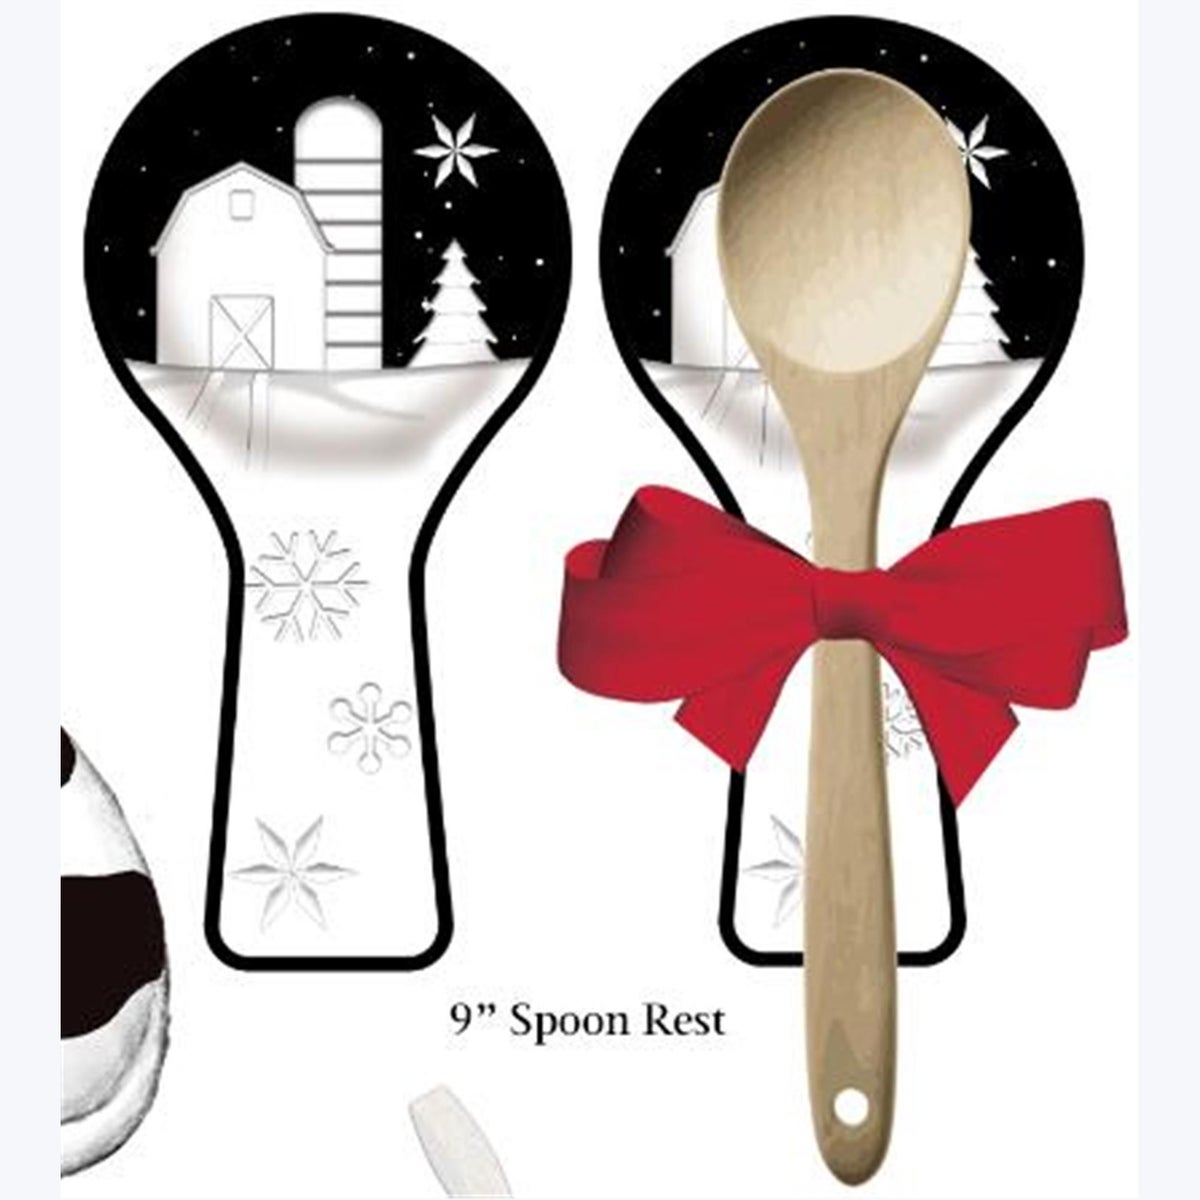 Ceramic Country Christmas Spoon Rest with Wooden Spoon